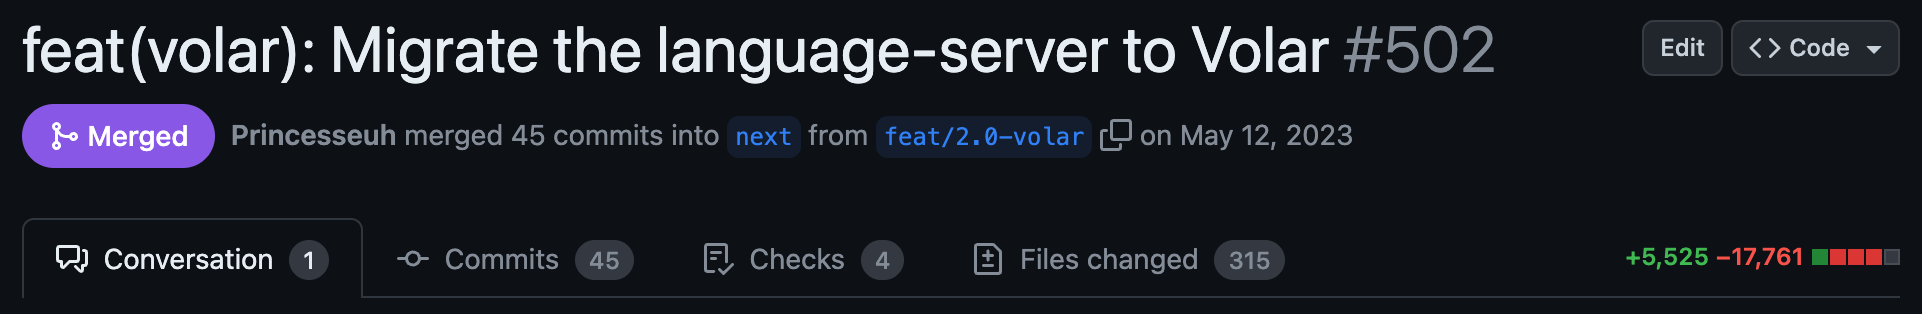 Shows the pull request where the Volar migration was merged. 325 files were modified, 5823 additions, and 17238 deletions.